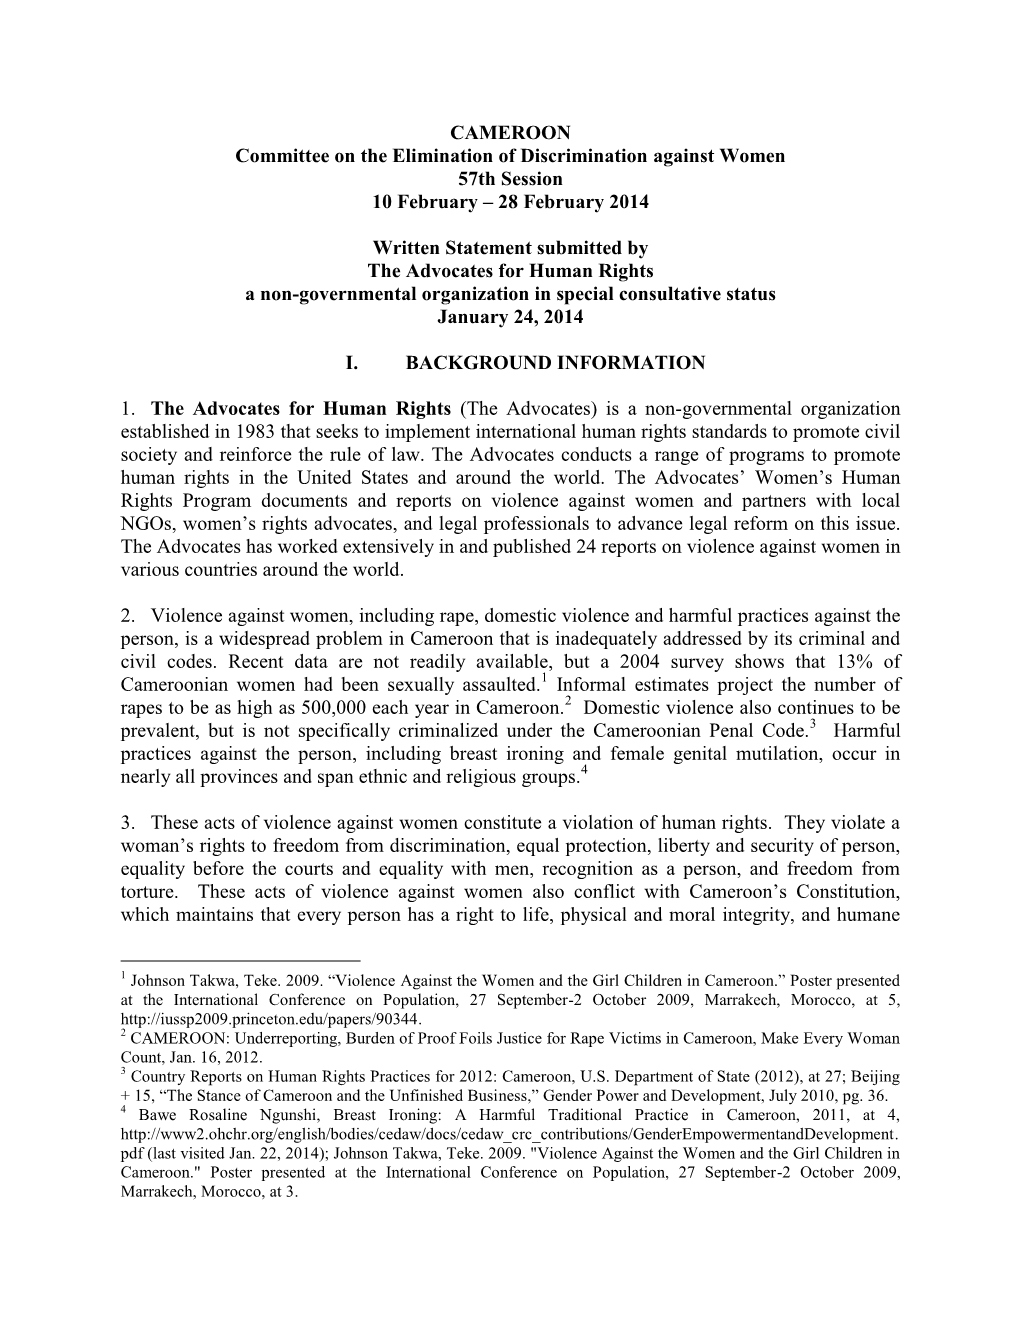 CAMEROON Committee on the Elimination of Discrimination Against Women 57Th Session 10 February – 28 February 2014